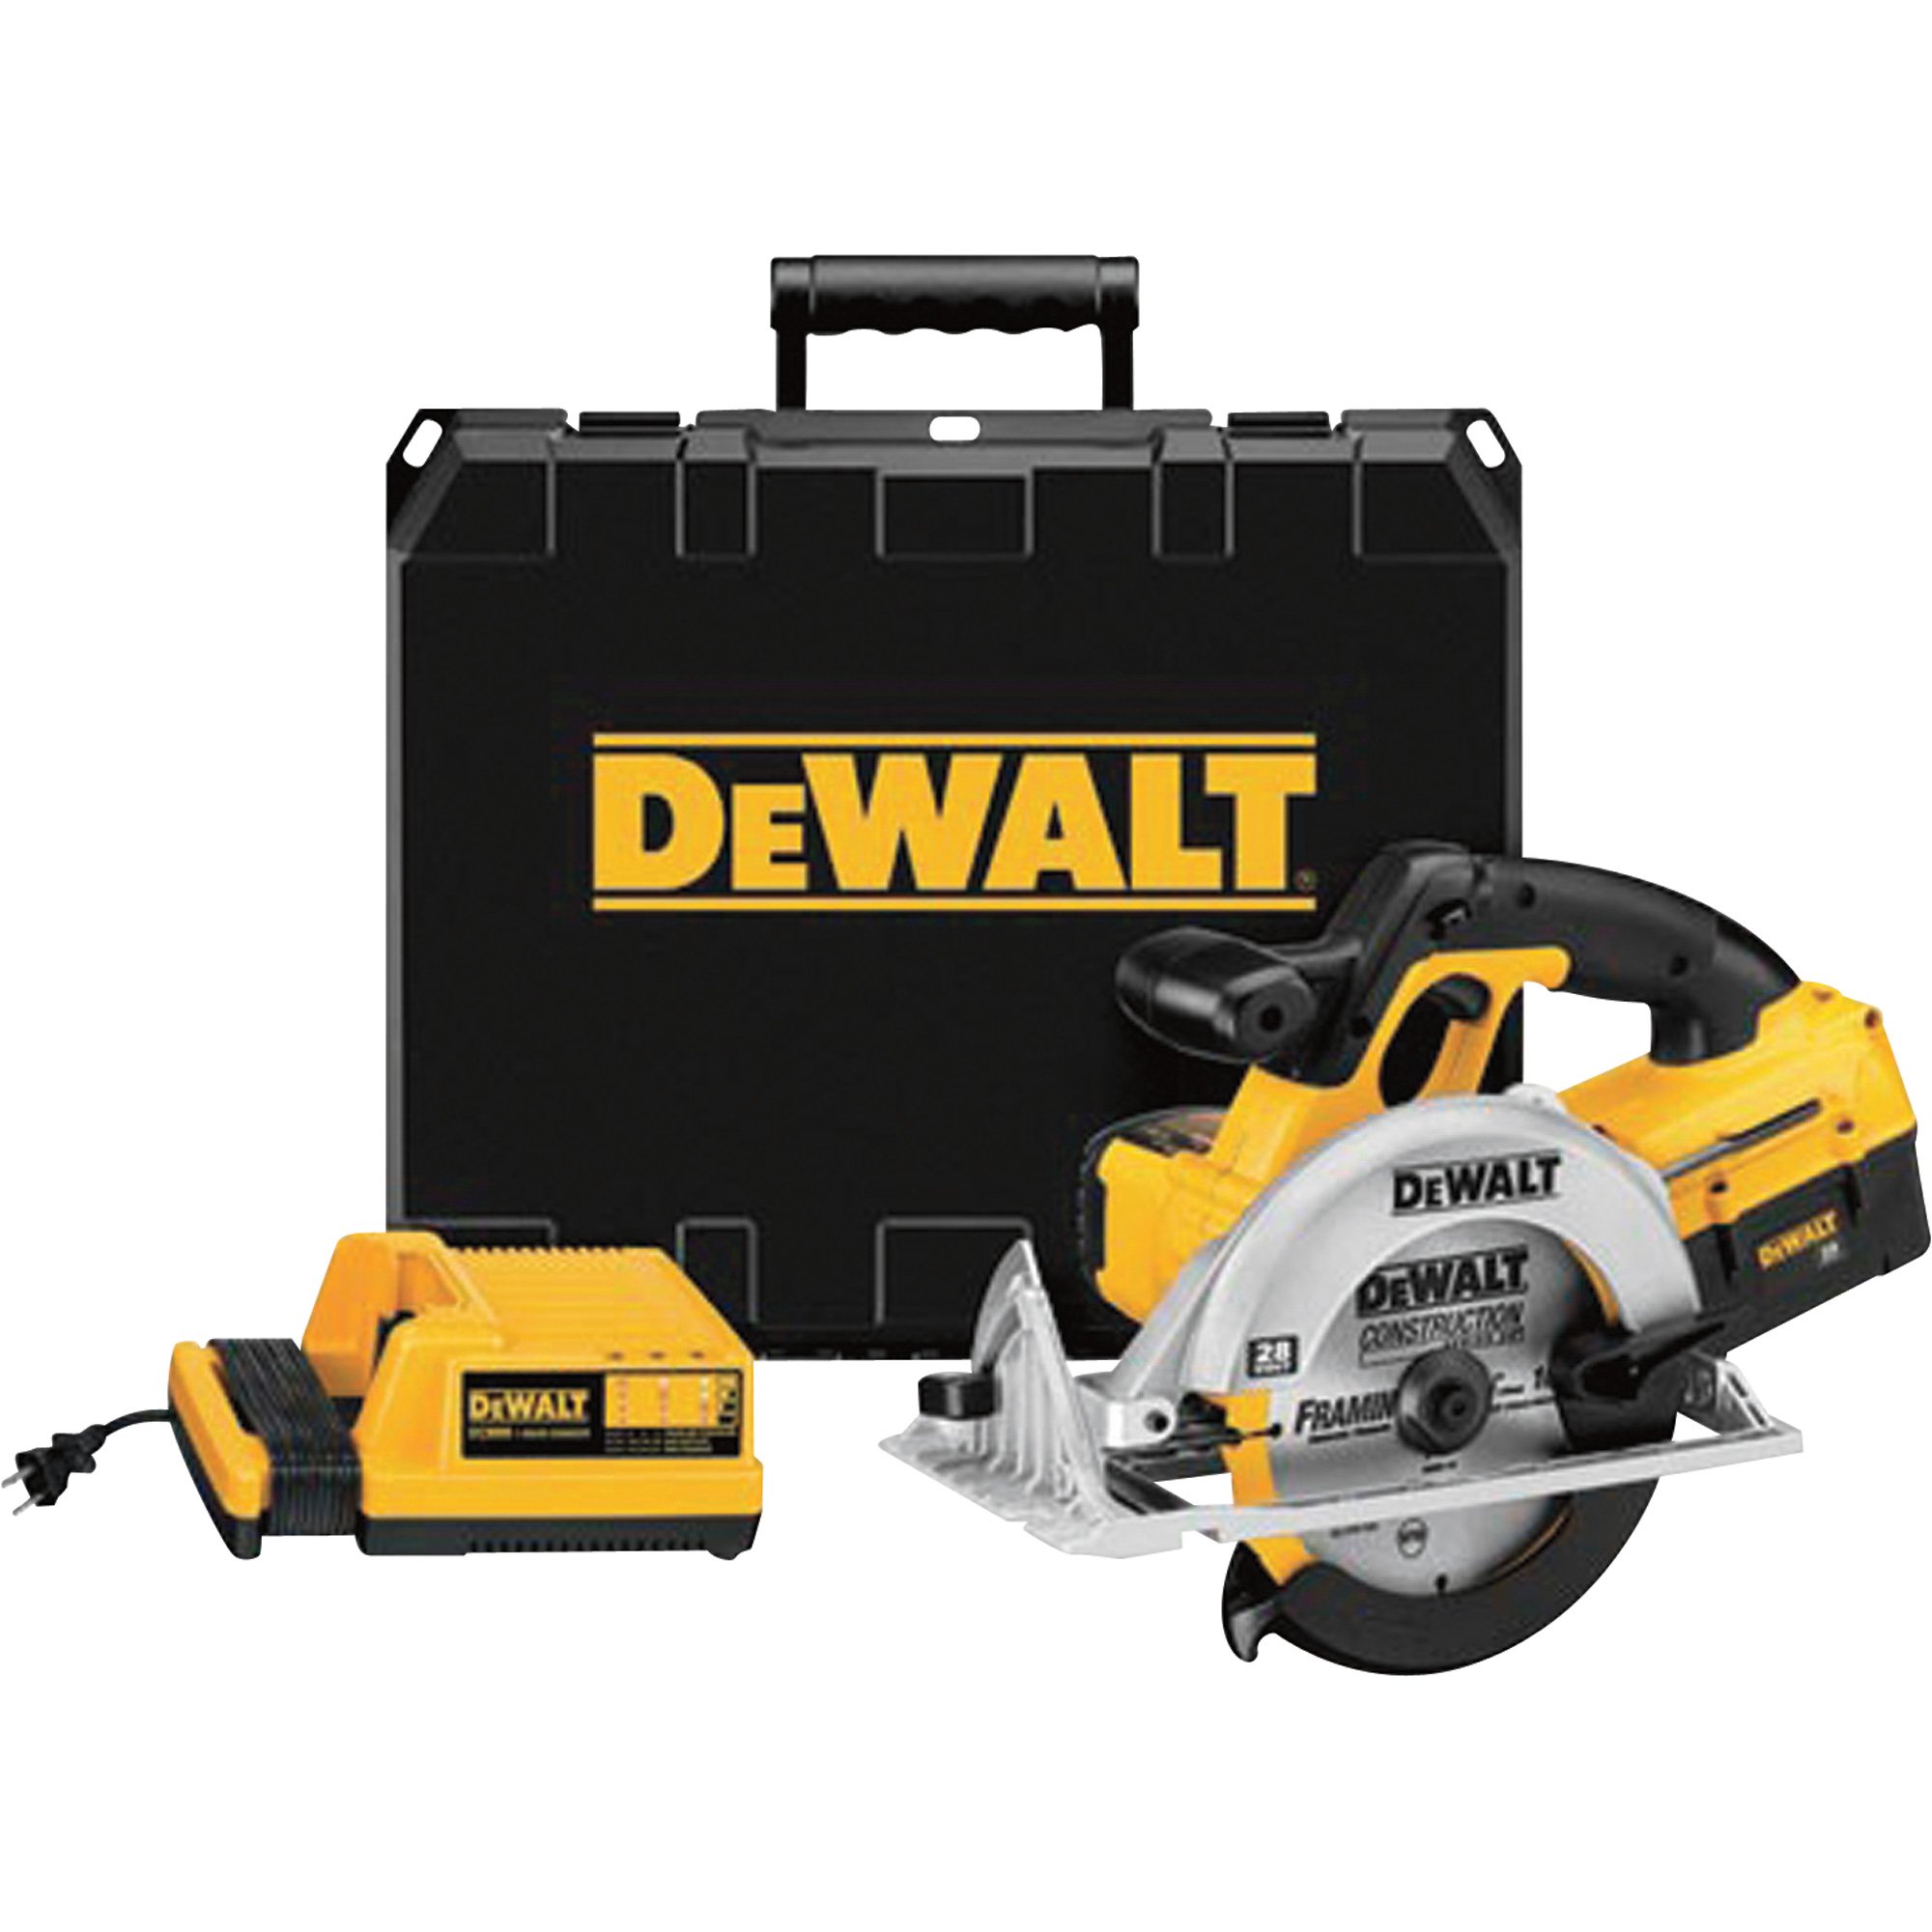 DEWALT 6 1/2in. Cordless Circular Saw Kit with Technology — 28 Volt, Model# DC310K | Northern Tool